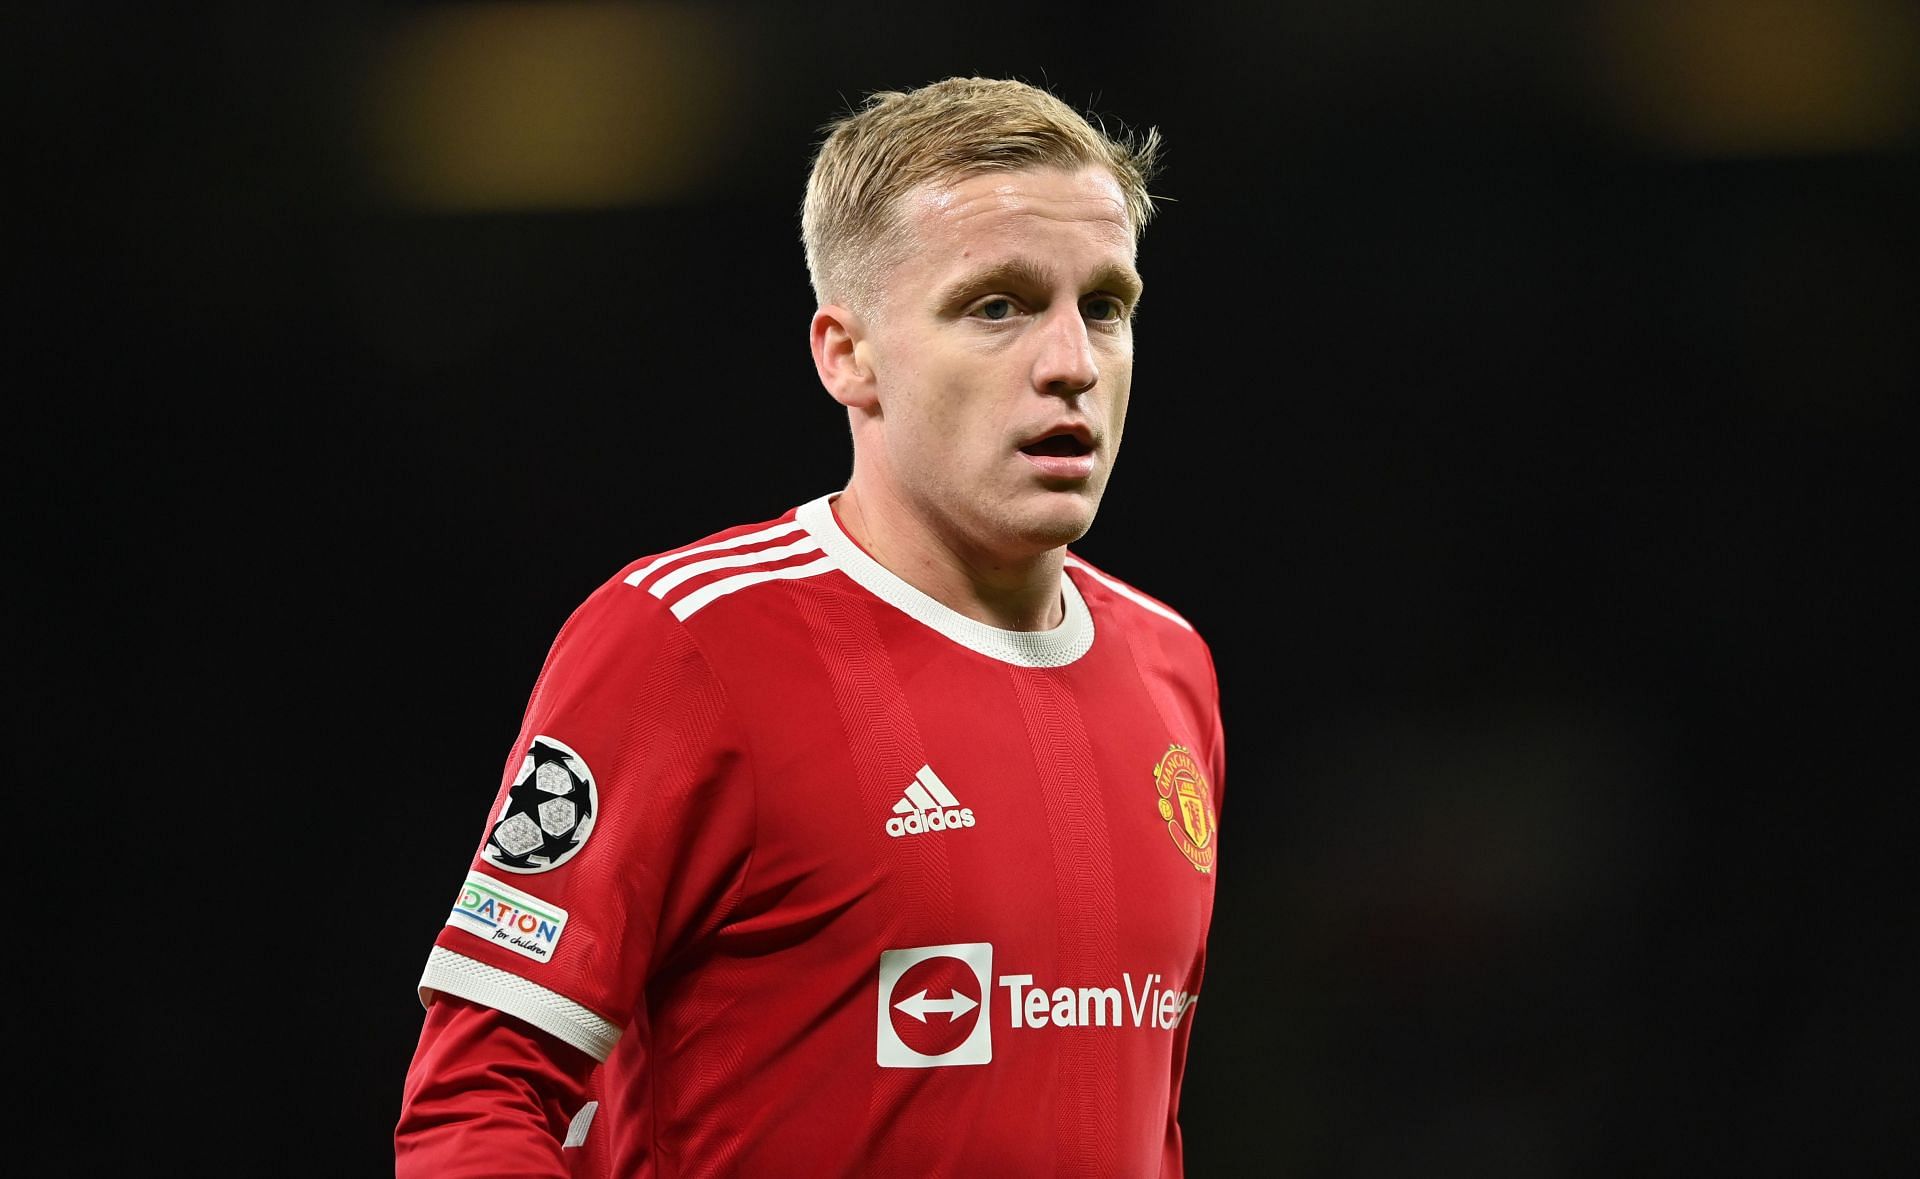 Donny Van de Beek will look to make the most out of his loan spell.